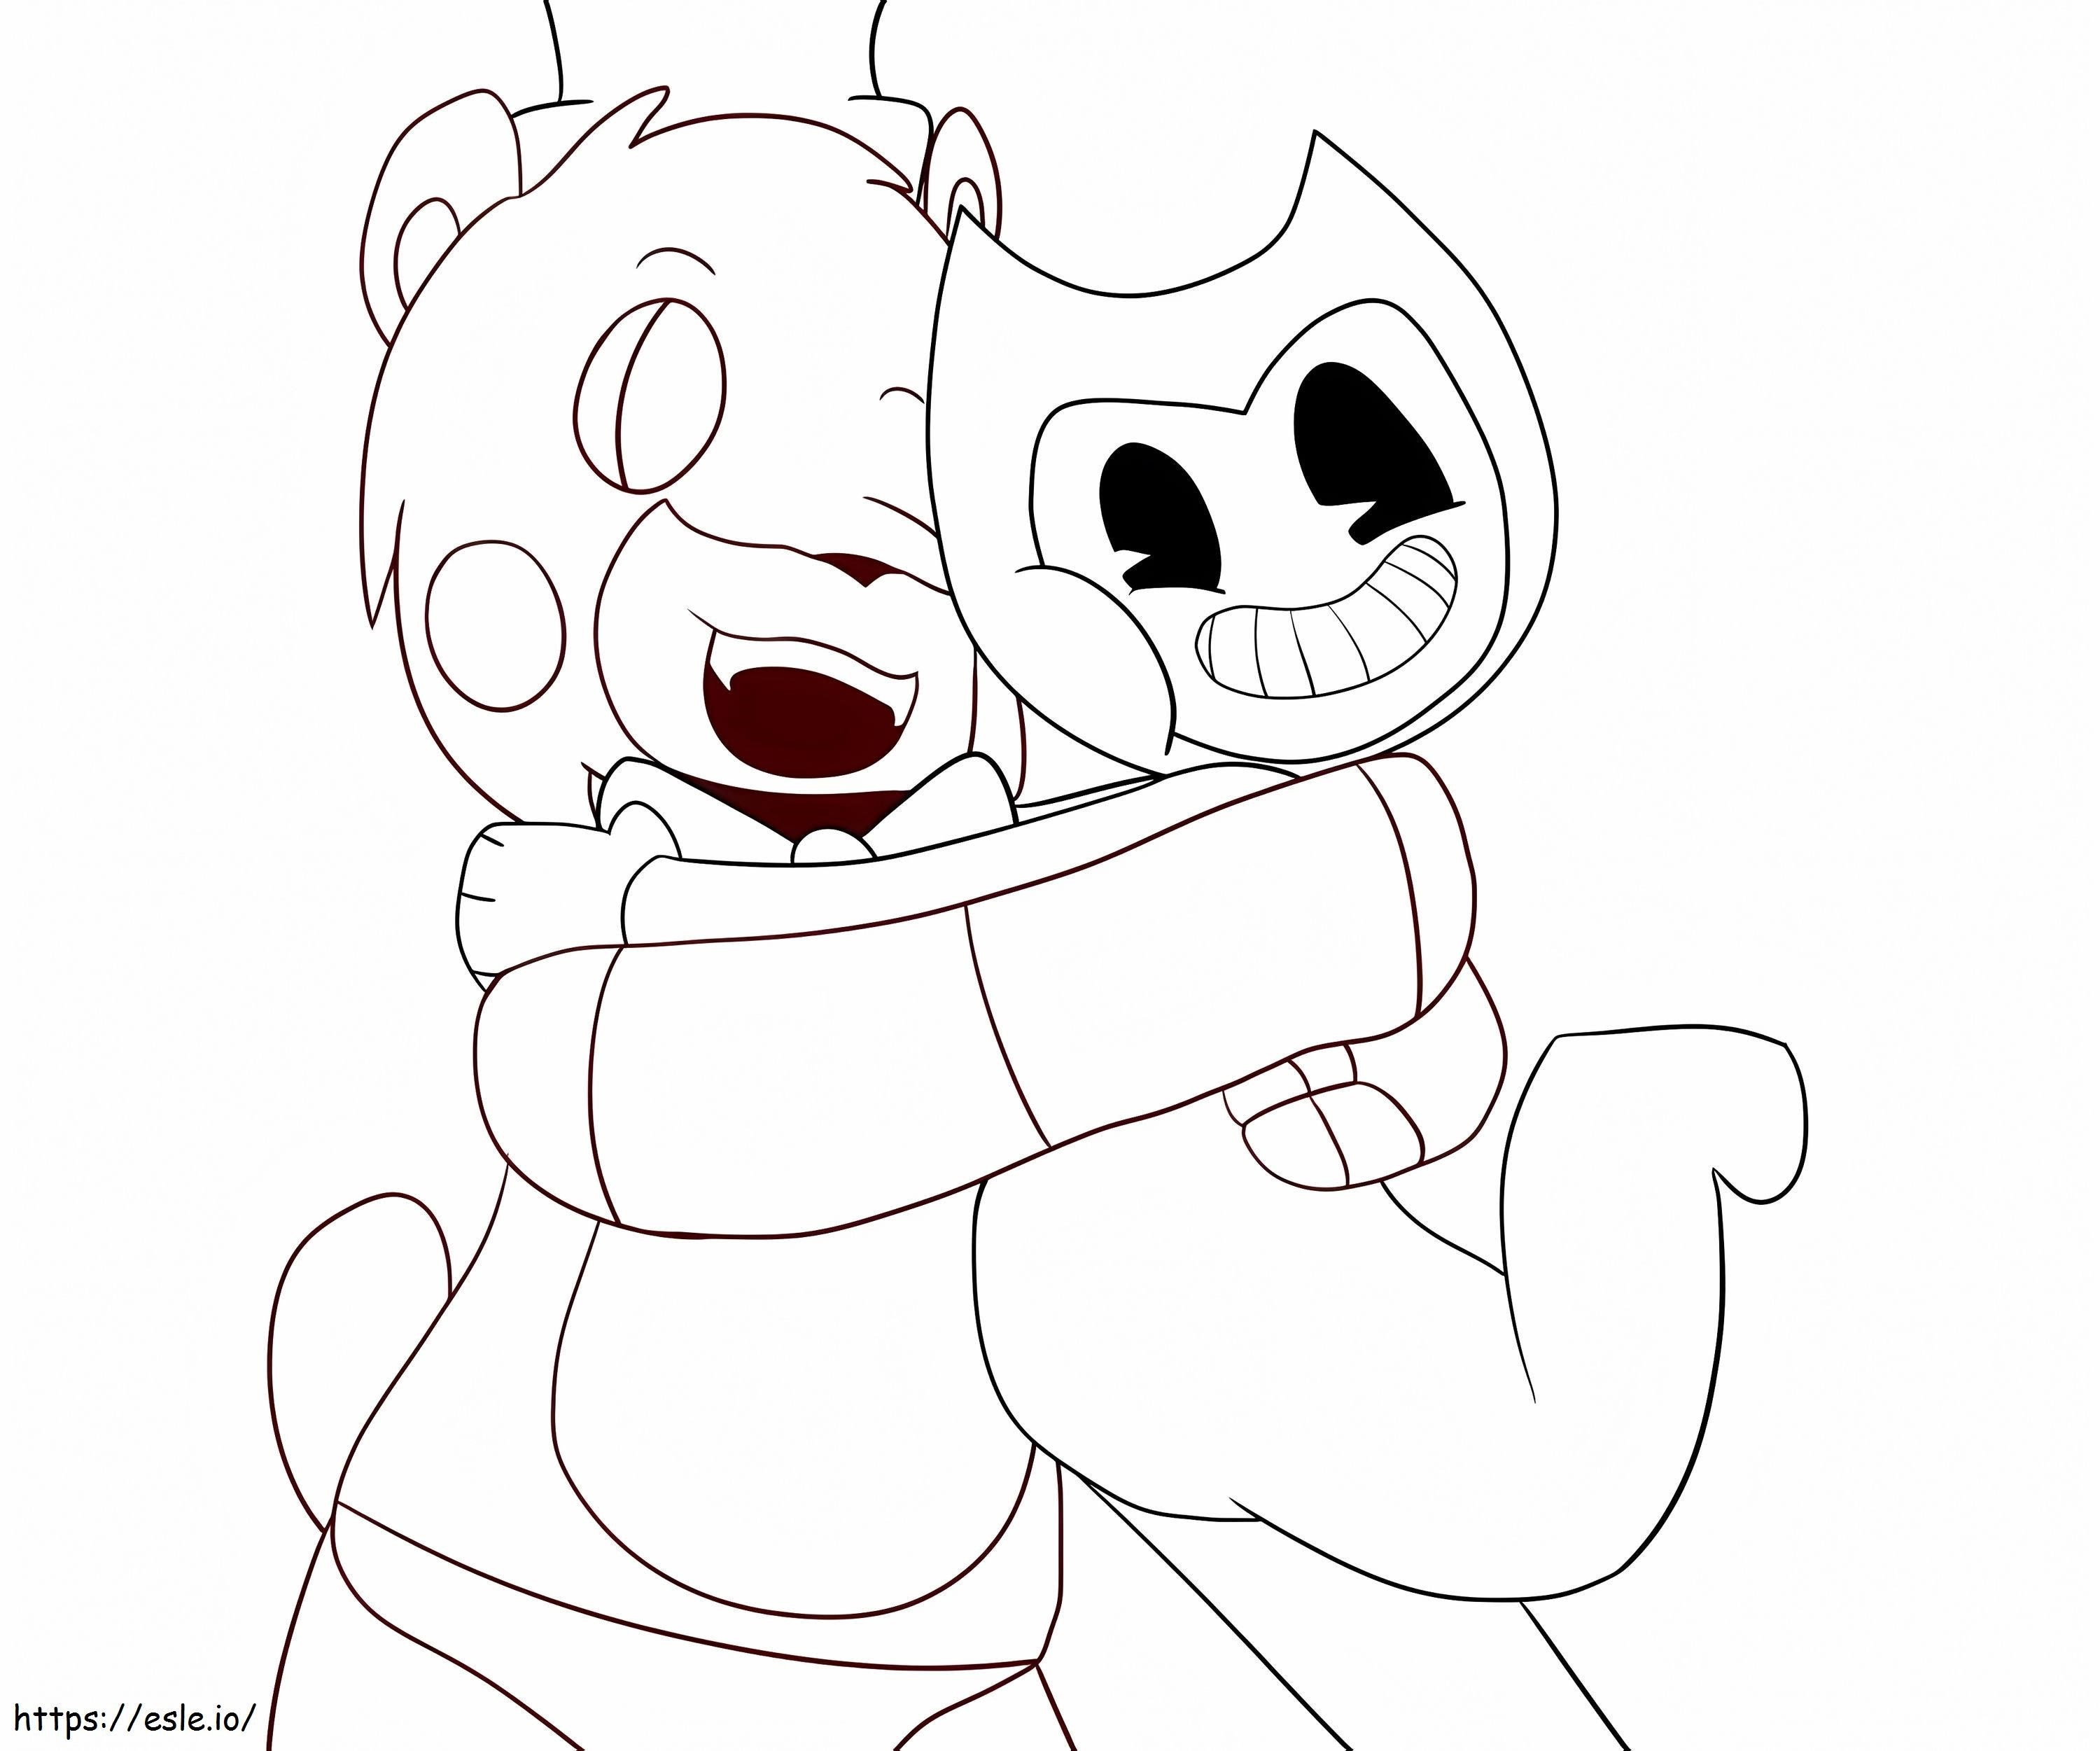 Freddy And Bendy A4 coloring page